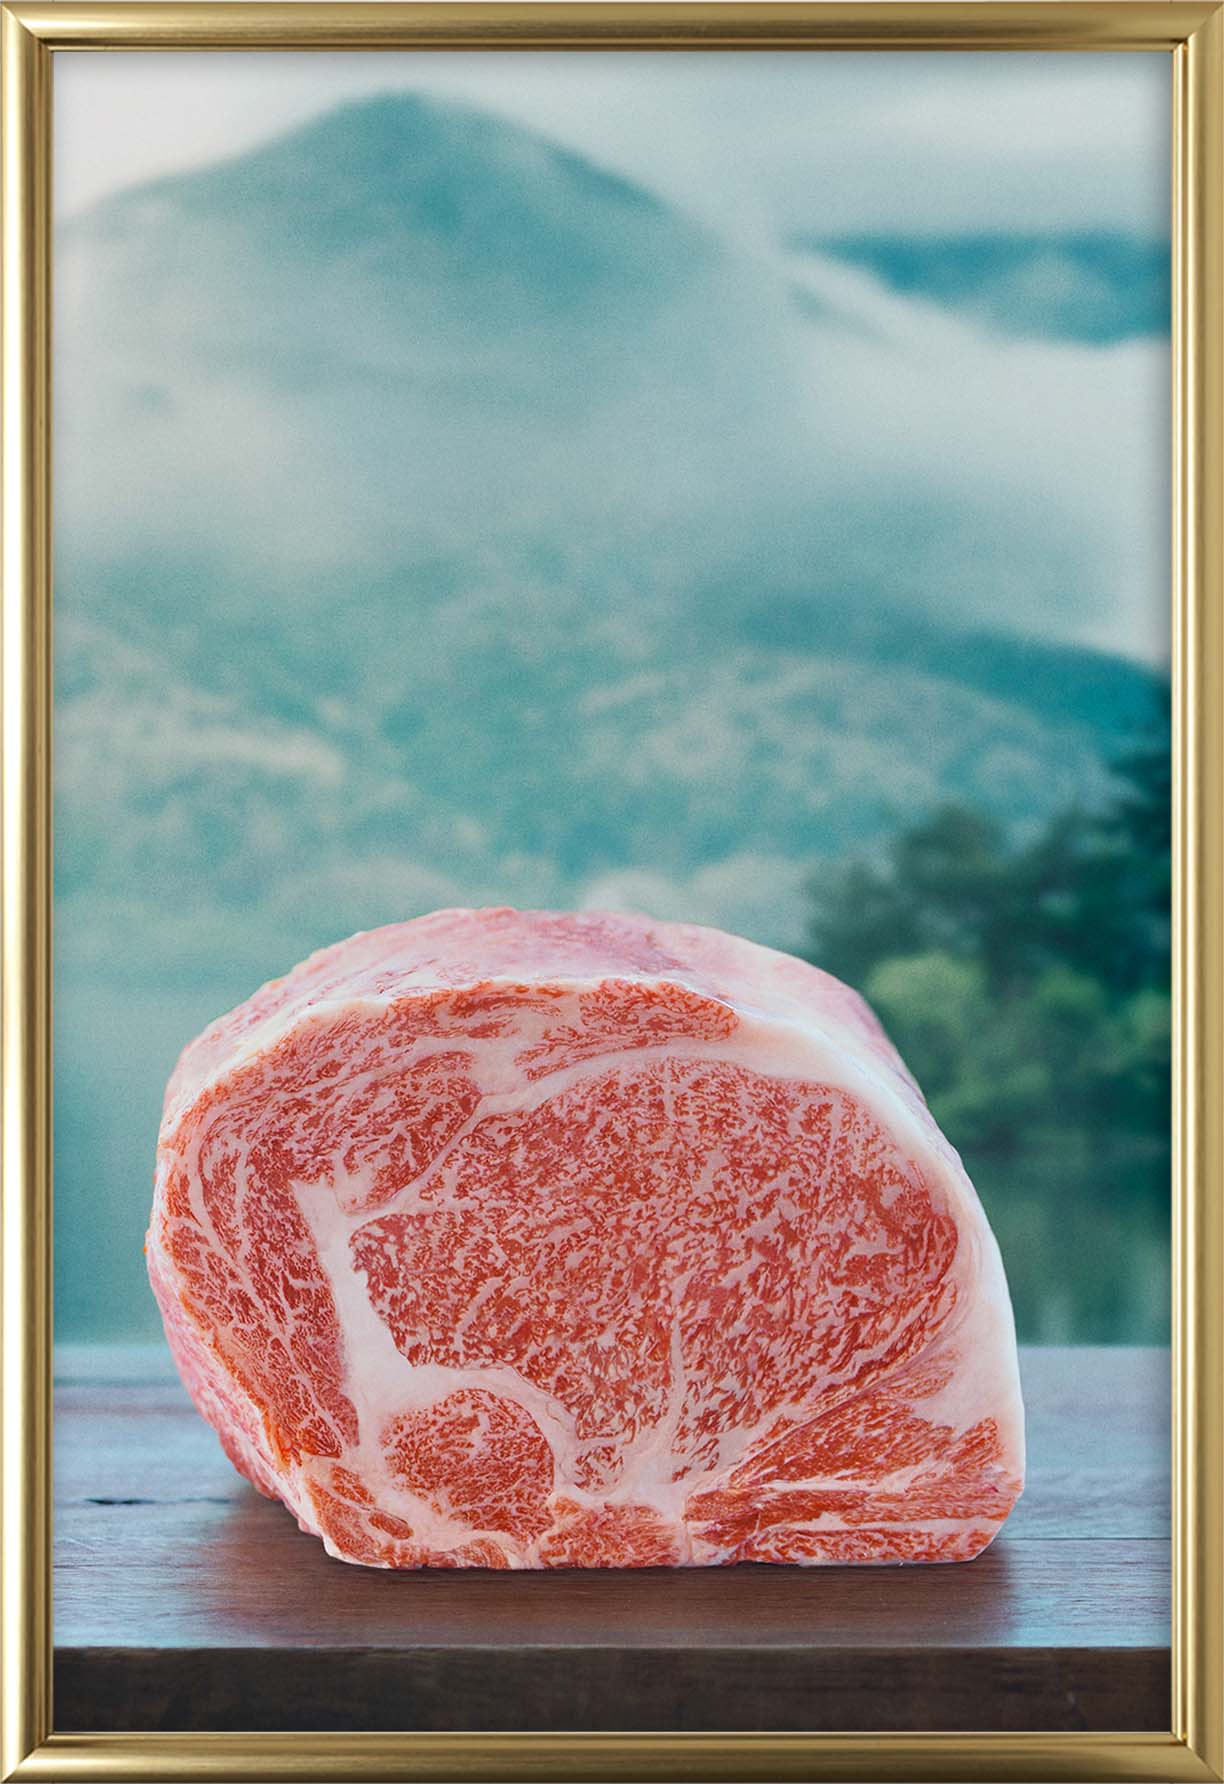 What Makes Japanese Wagyu Special What Is Japanese Wagyu?